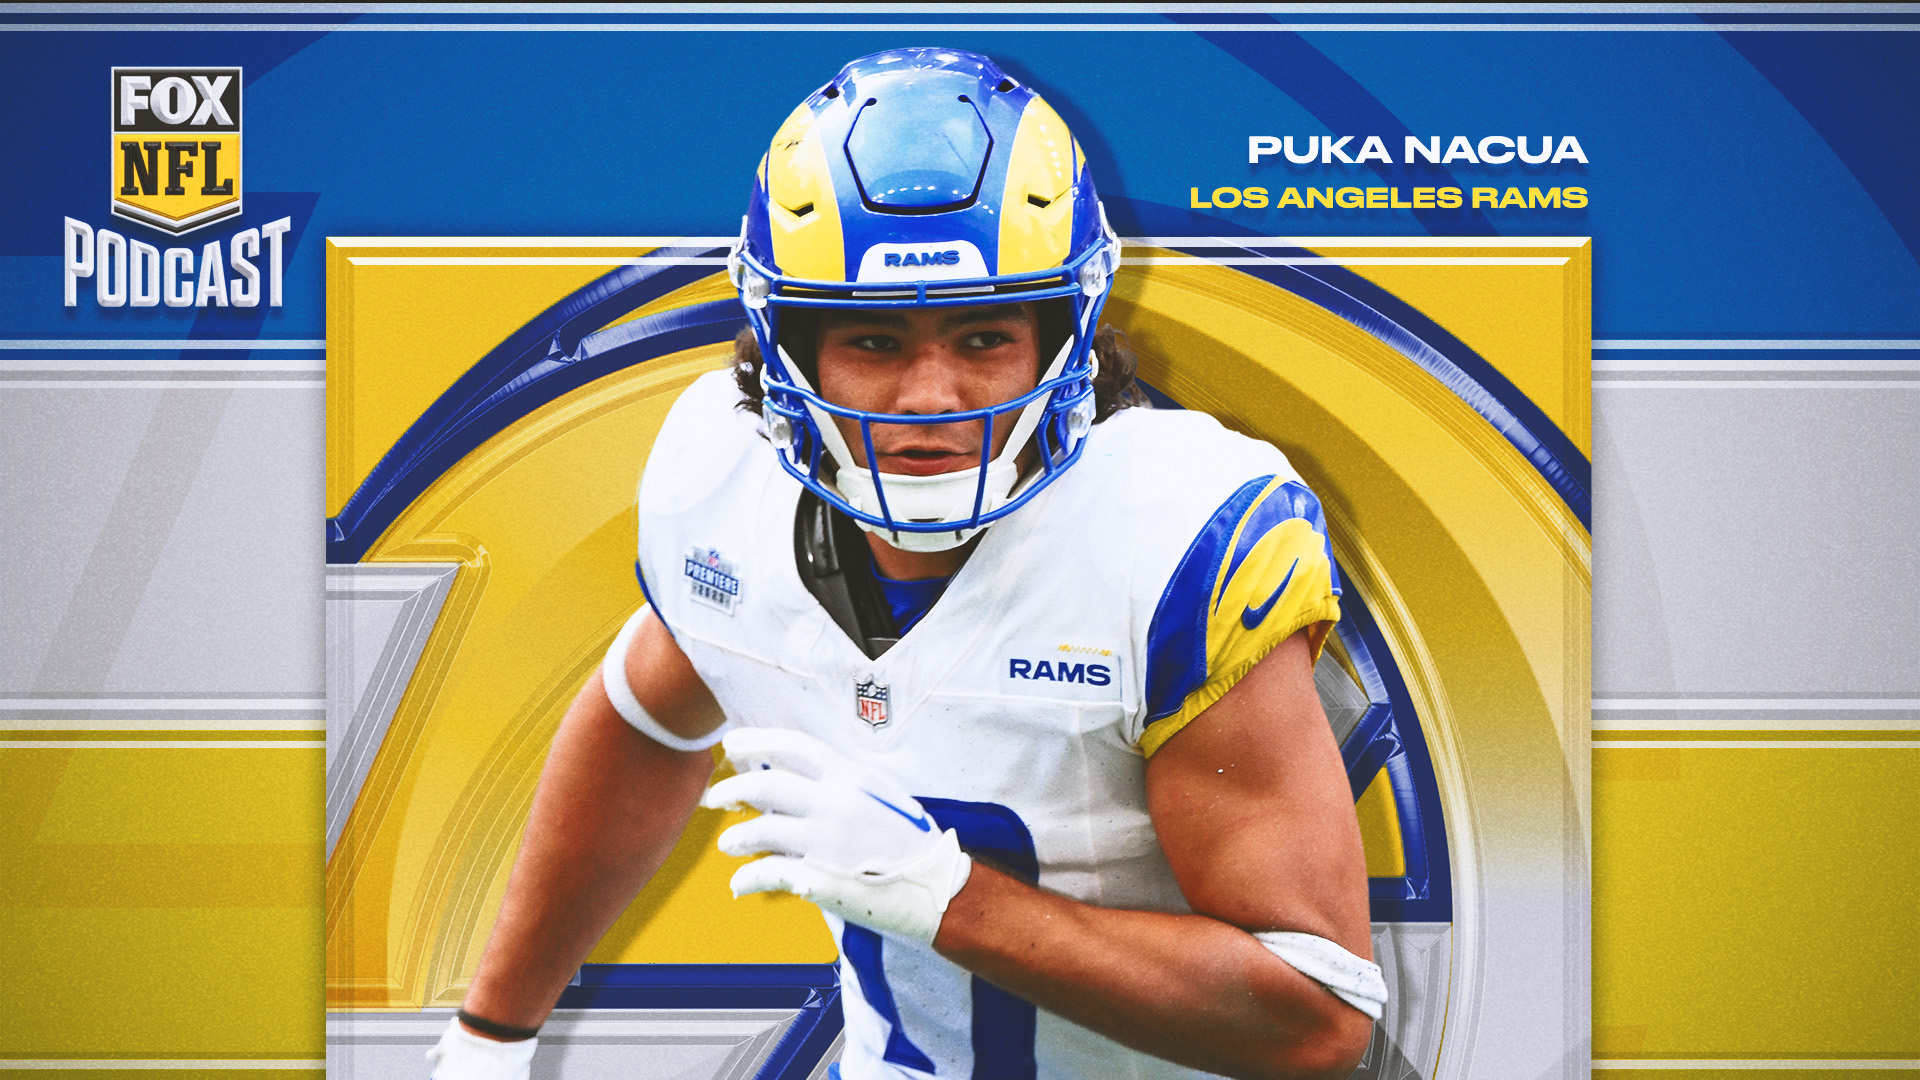 nfl tickets los angeles rams